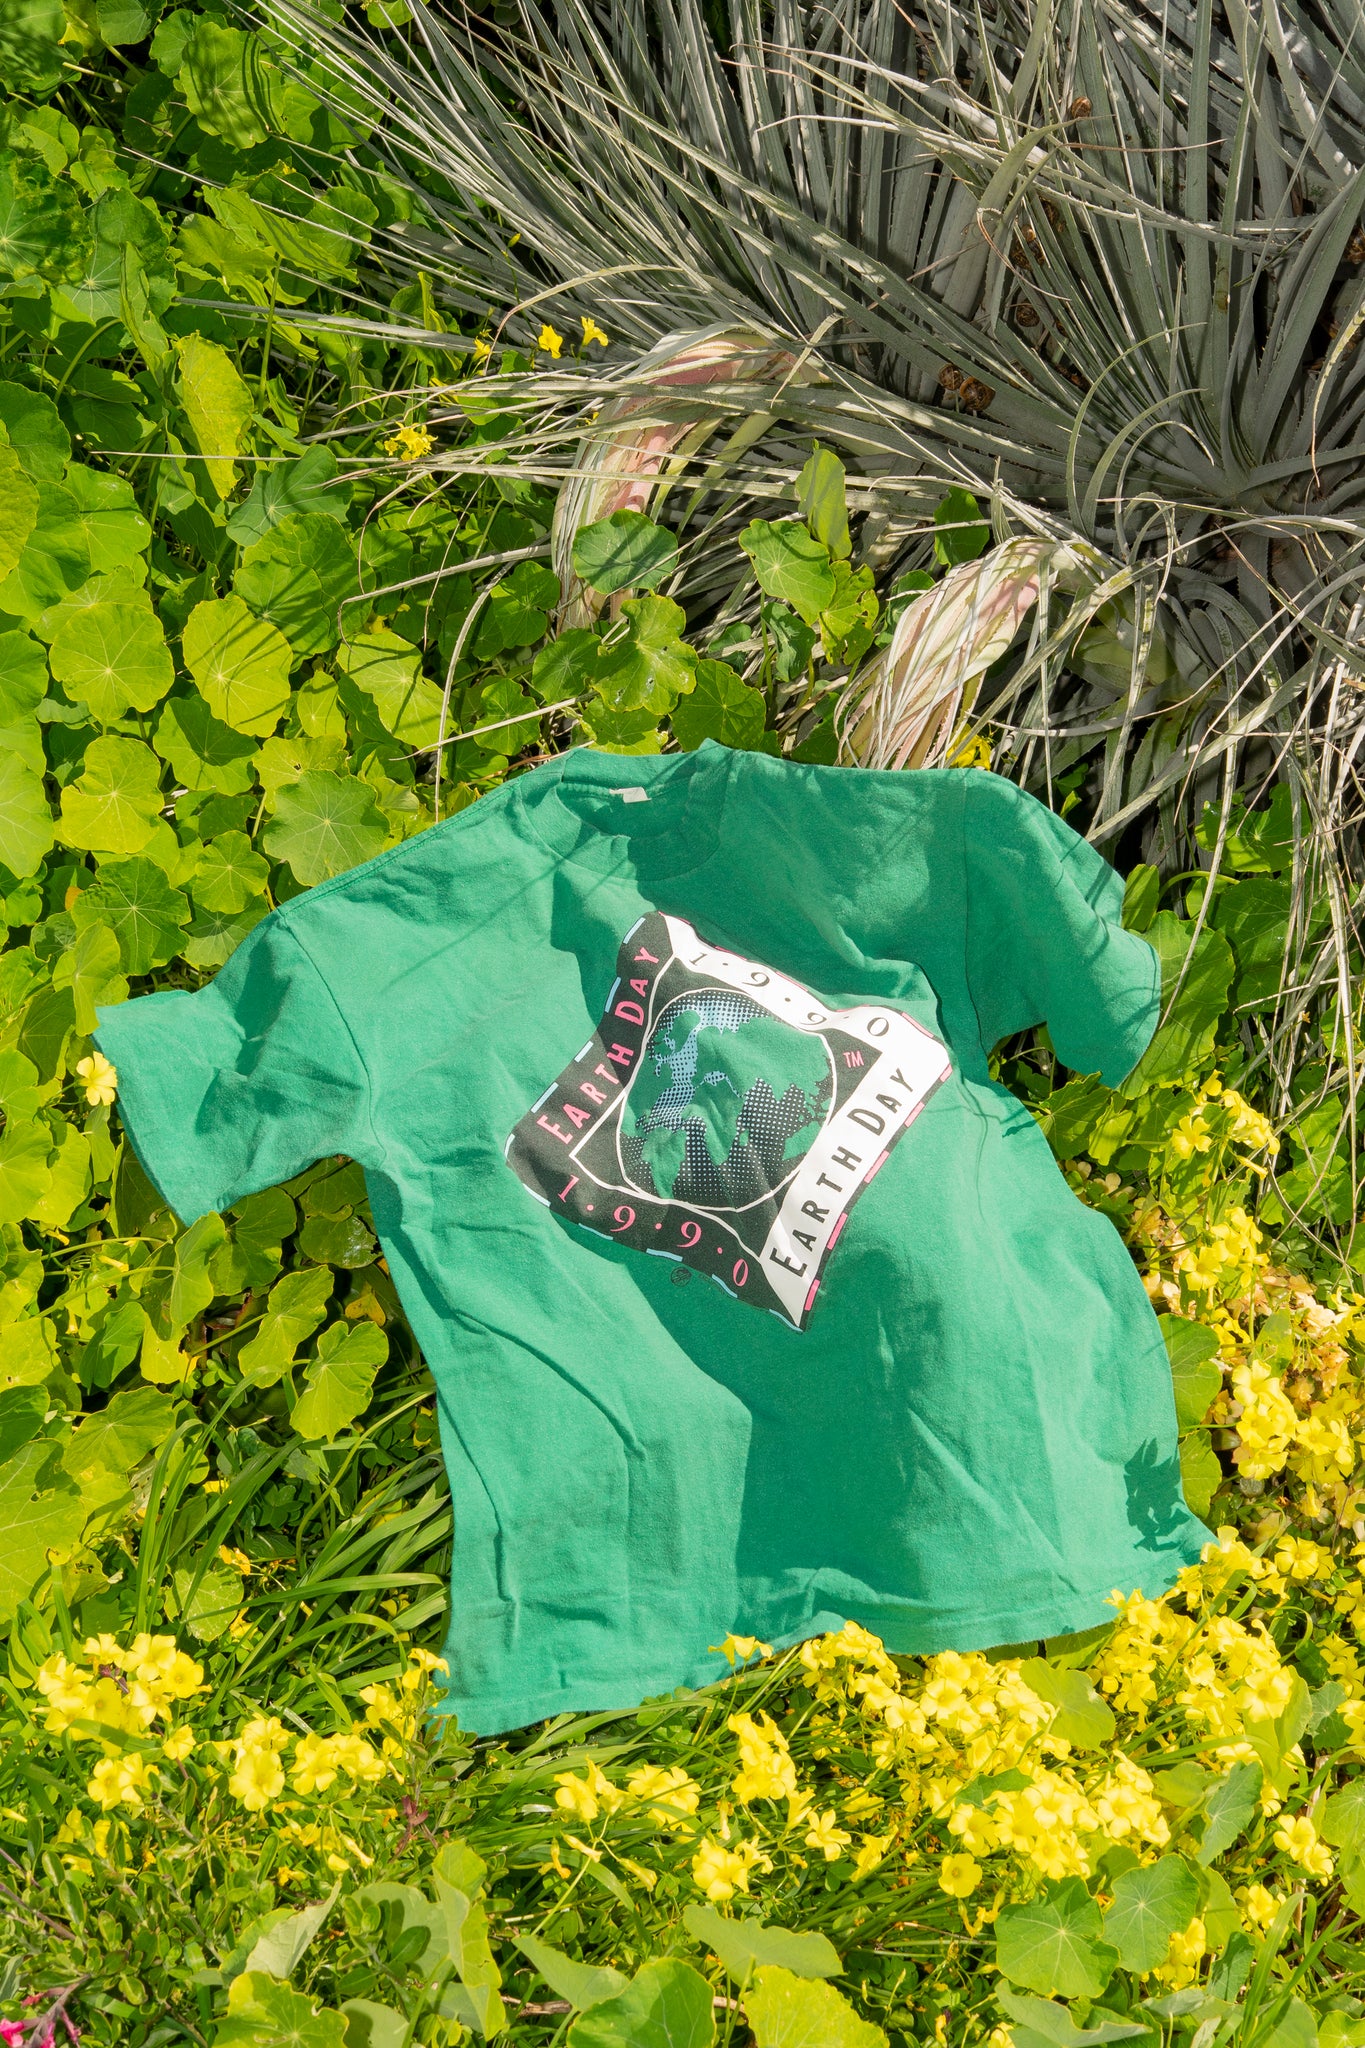 understory-shop - VINTAGE - VTG 90s EARTH DAY GREEN TEE